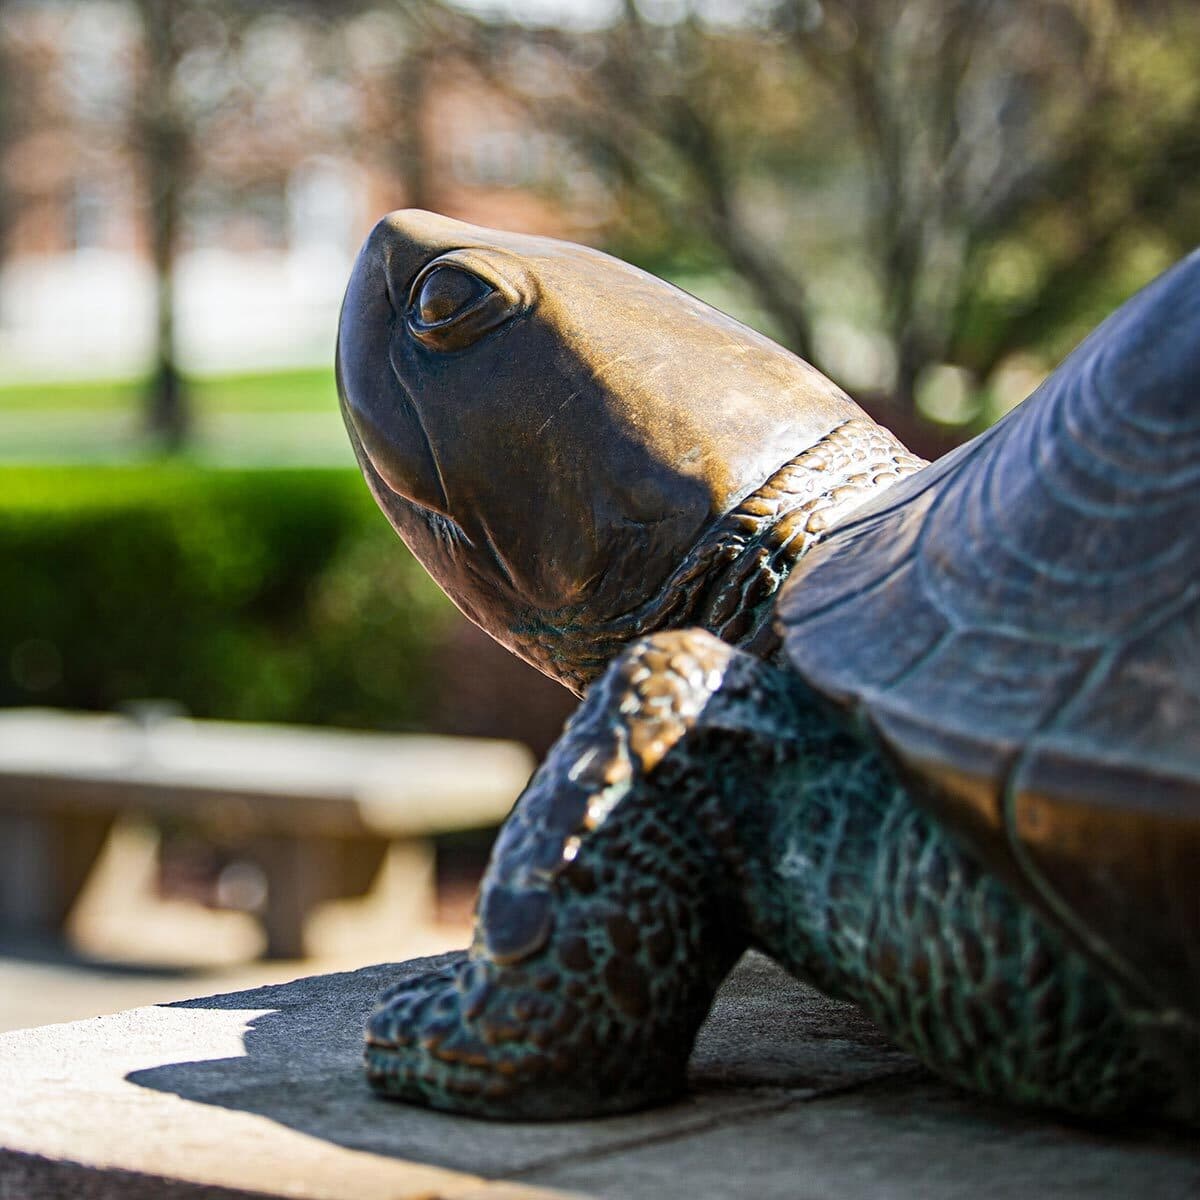 A weathered bronze statue of Testudo the terrapin, nose polished by eager students looking for a bit of good luck, looks up basking in the warm sun